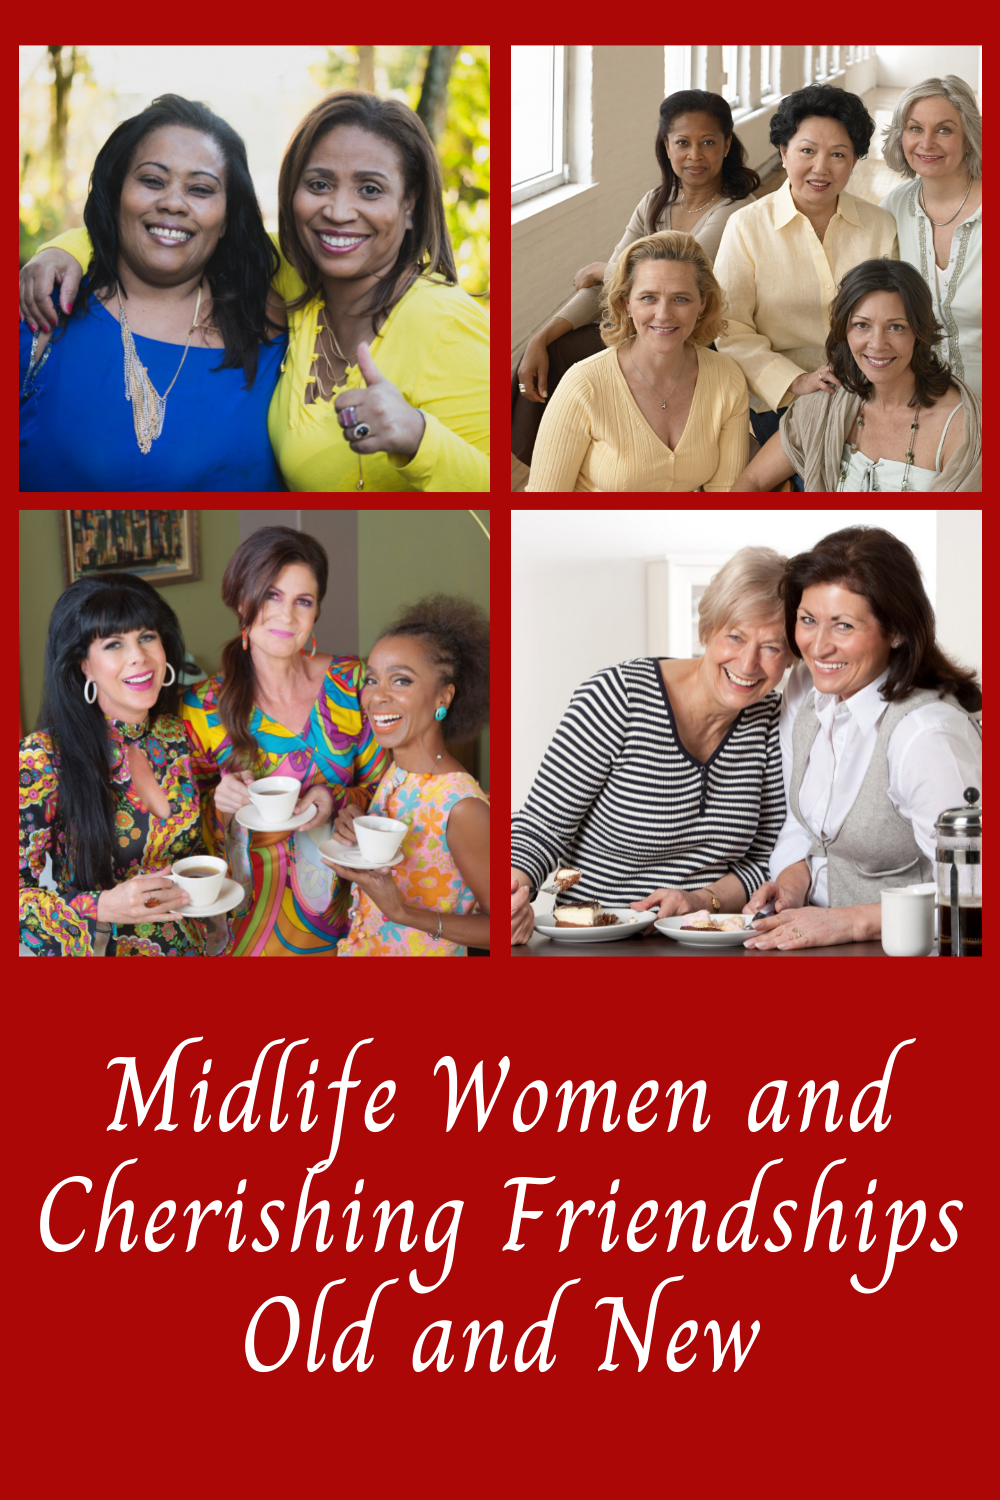 Midlife Women and Cherishing Friendships Old and New